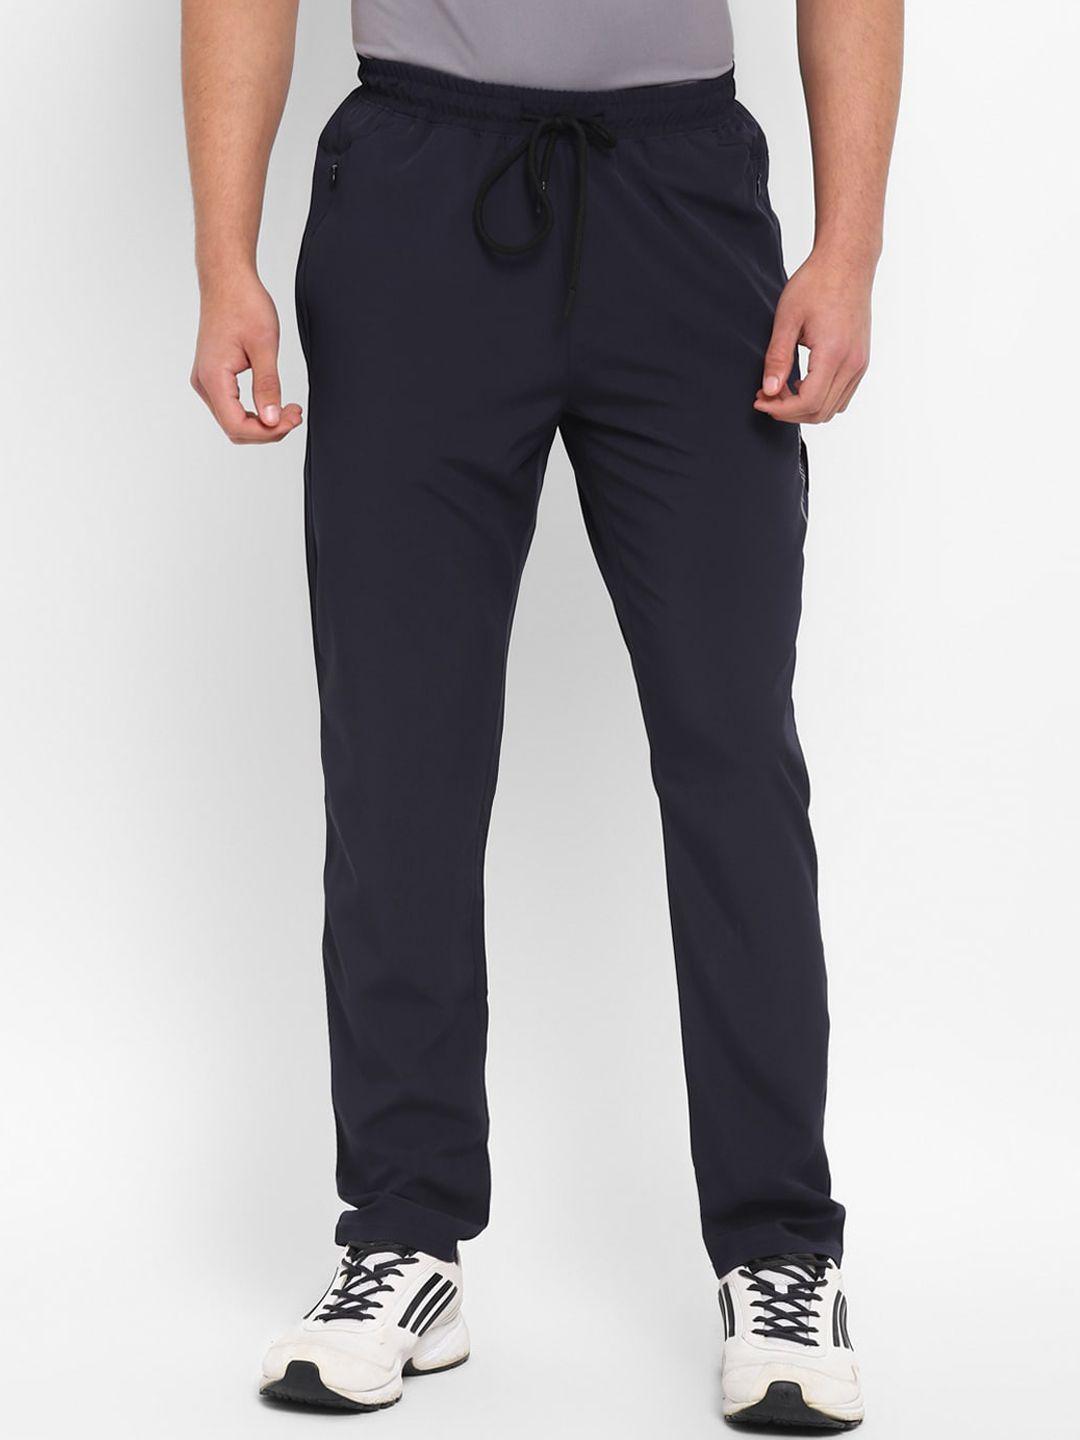 furo-by-red-chief-men-regular-fit-mid-rise-track-pants